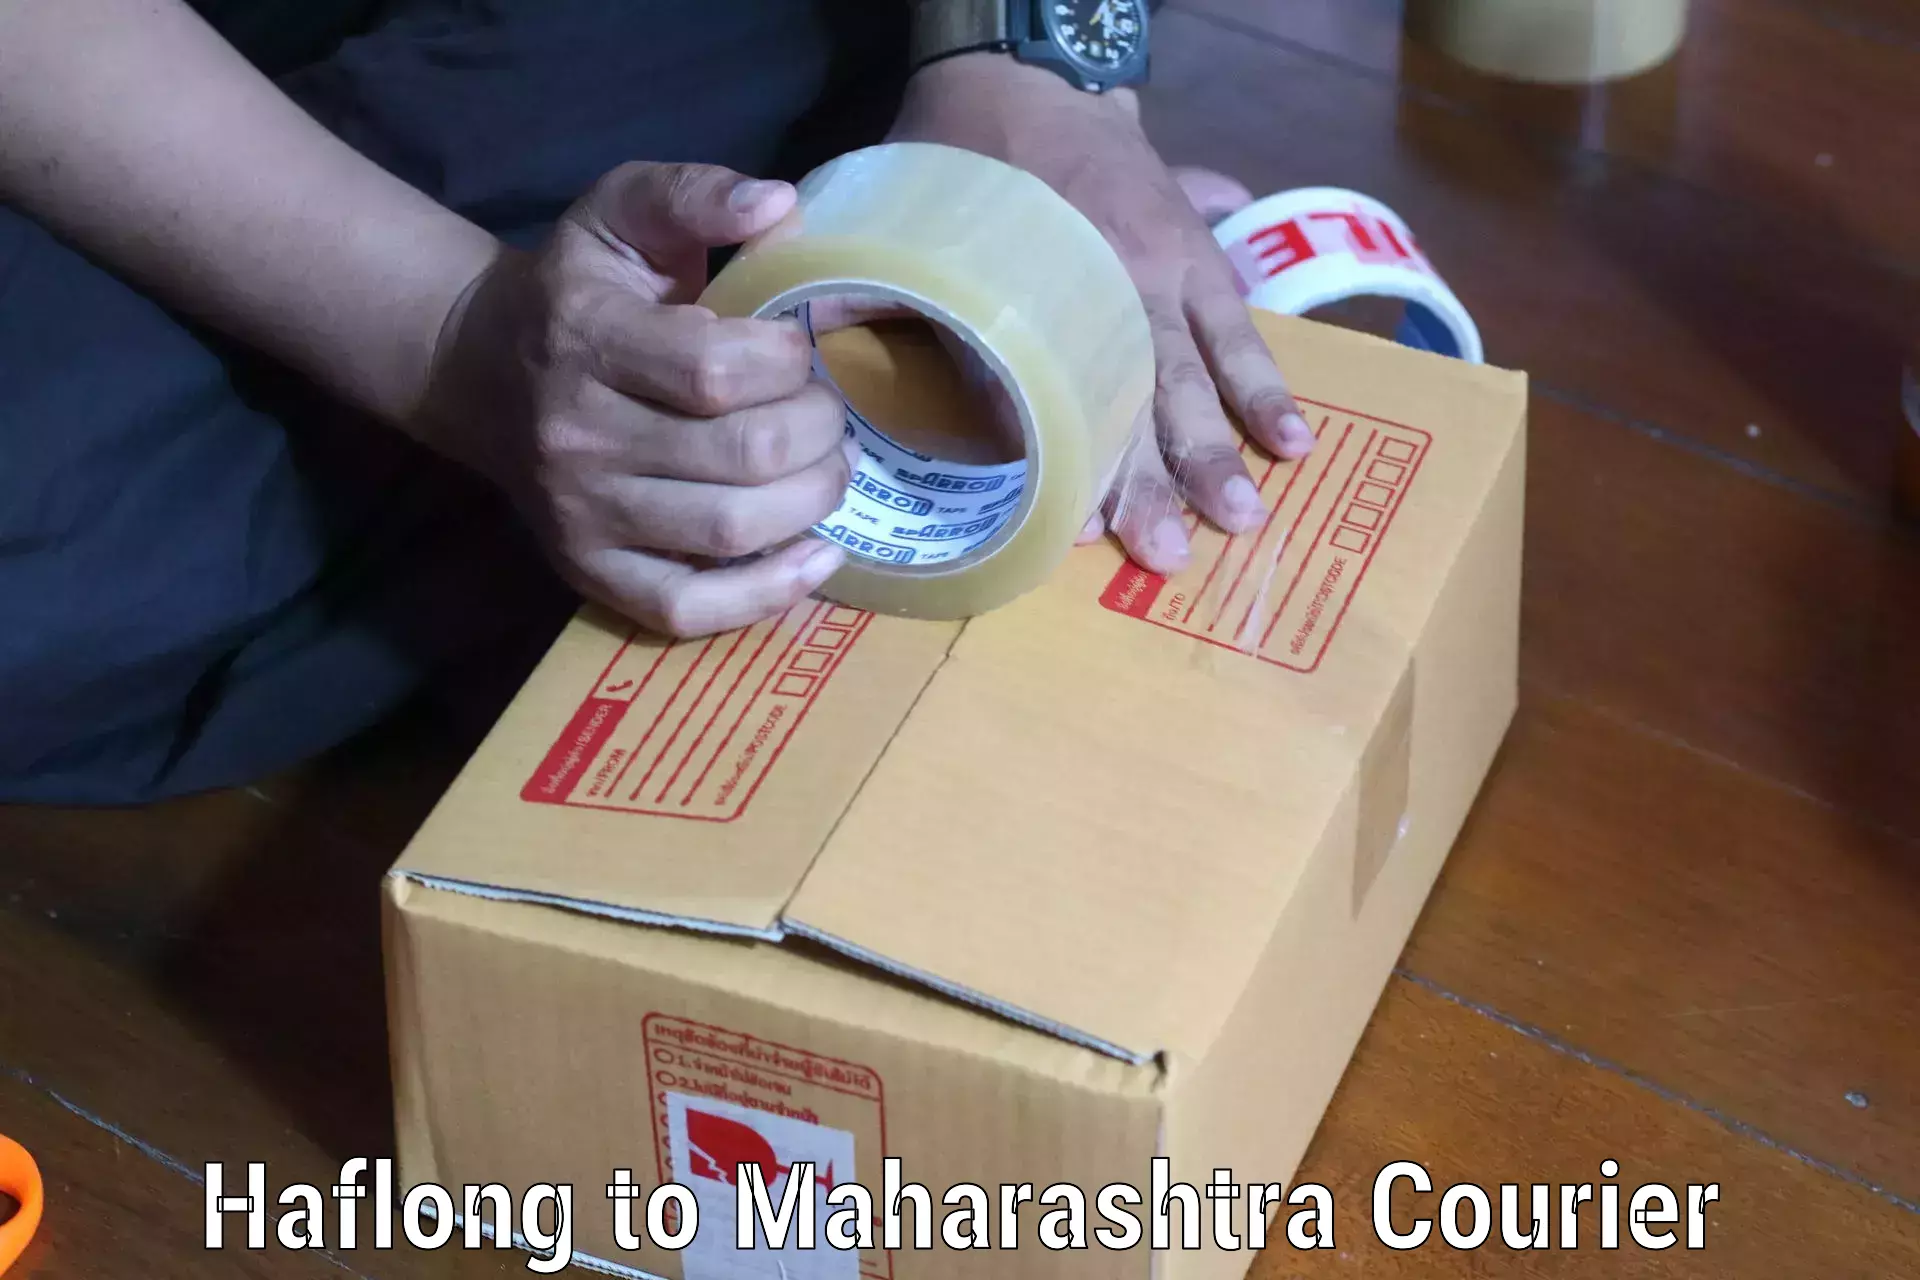 Full-service courier options in Haflong to Maharashtra